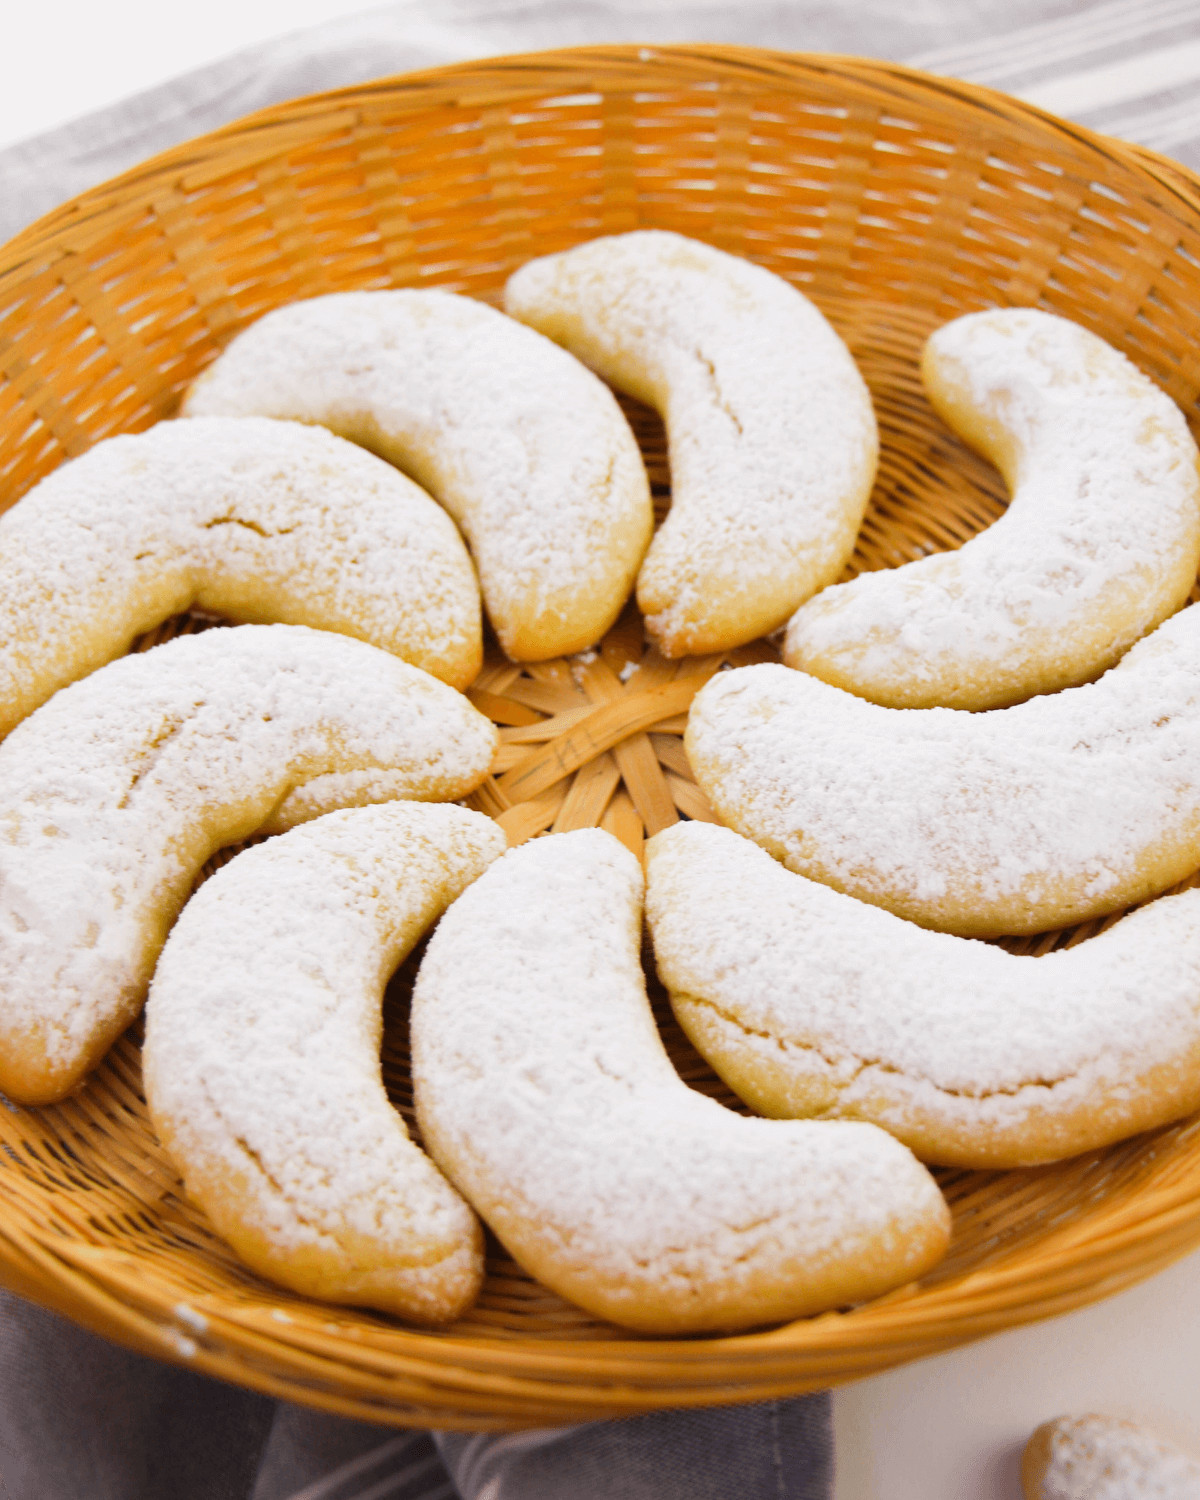 A close up on the almond flavored crescent cookies.